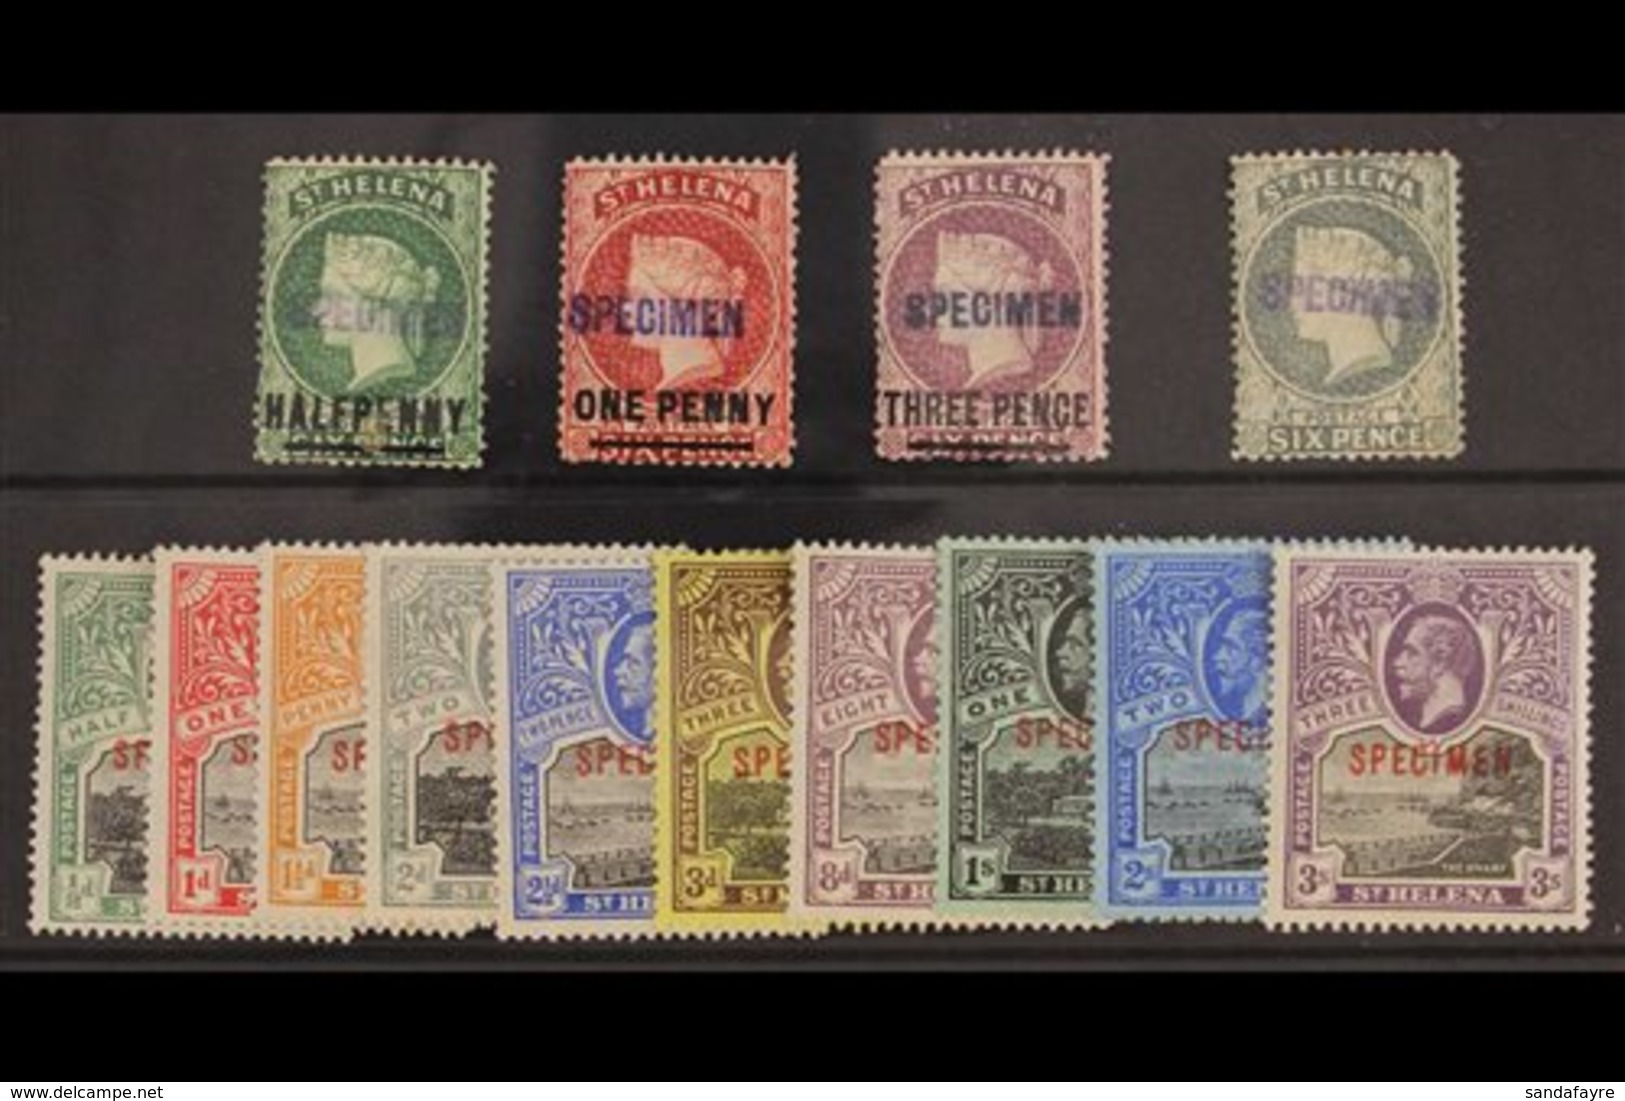 SPECIMENS Fresh Mint Selection With Scarce 1884 Set Of 4, SG 40s/44s And 1912 Geo V Set Complete, SG 72s/81s. (14 Stamps - Sint-Helena